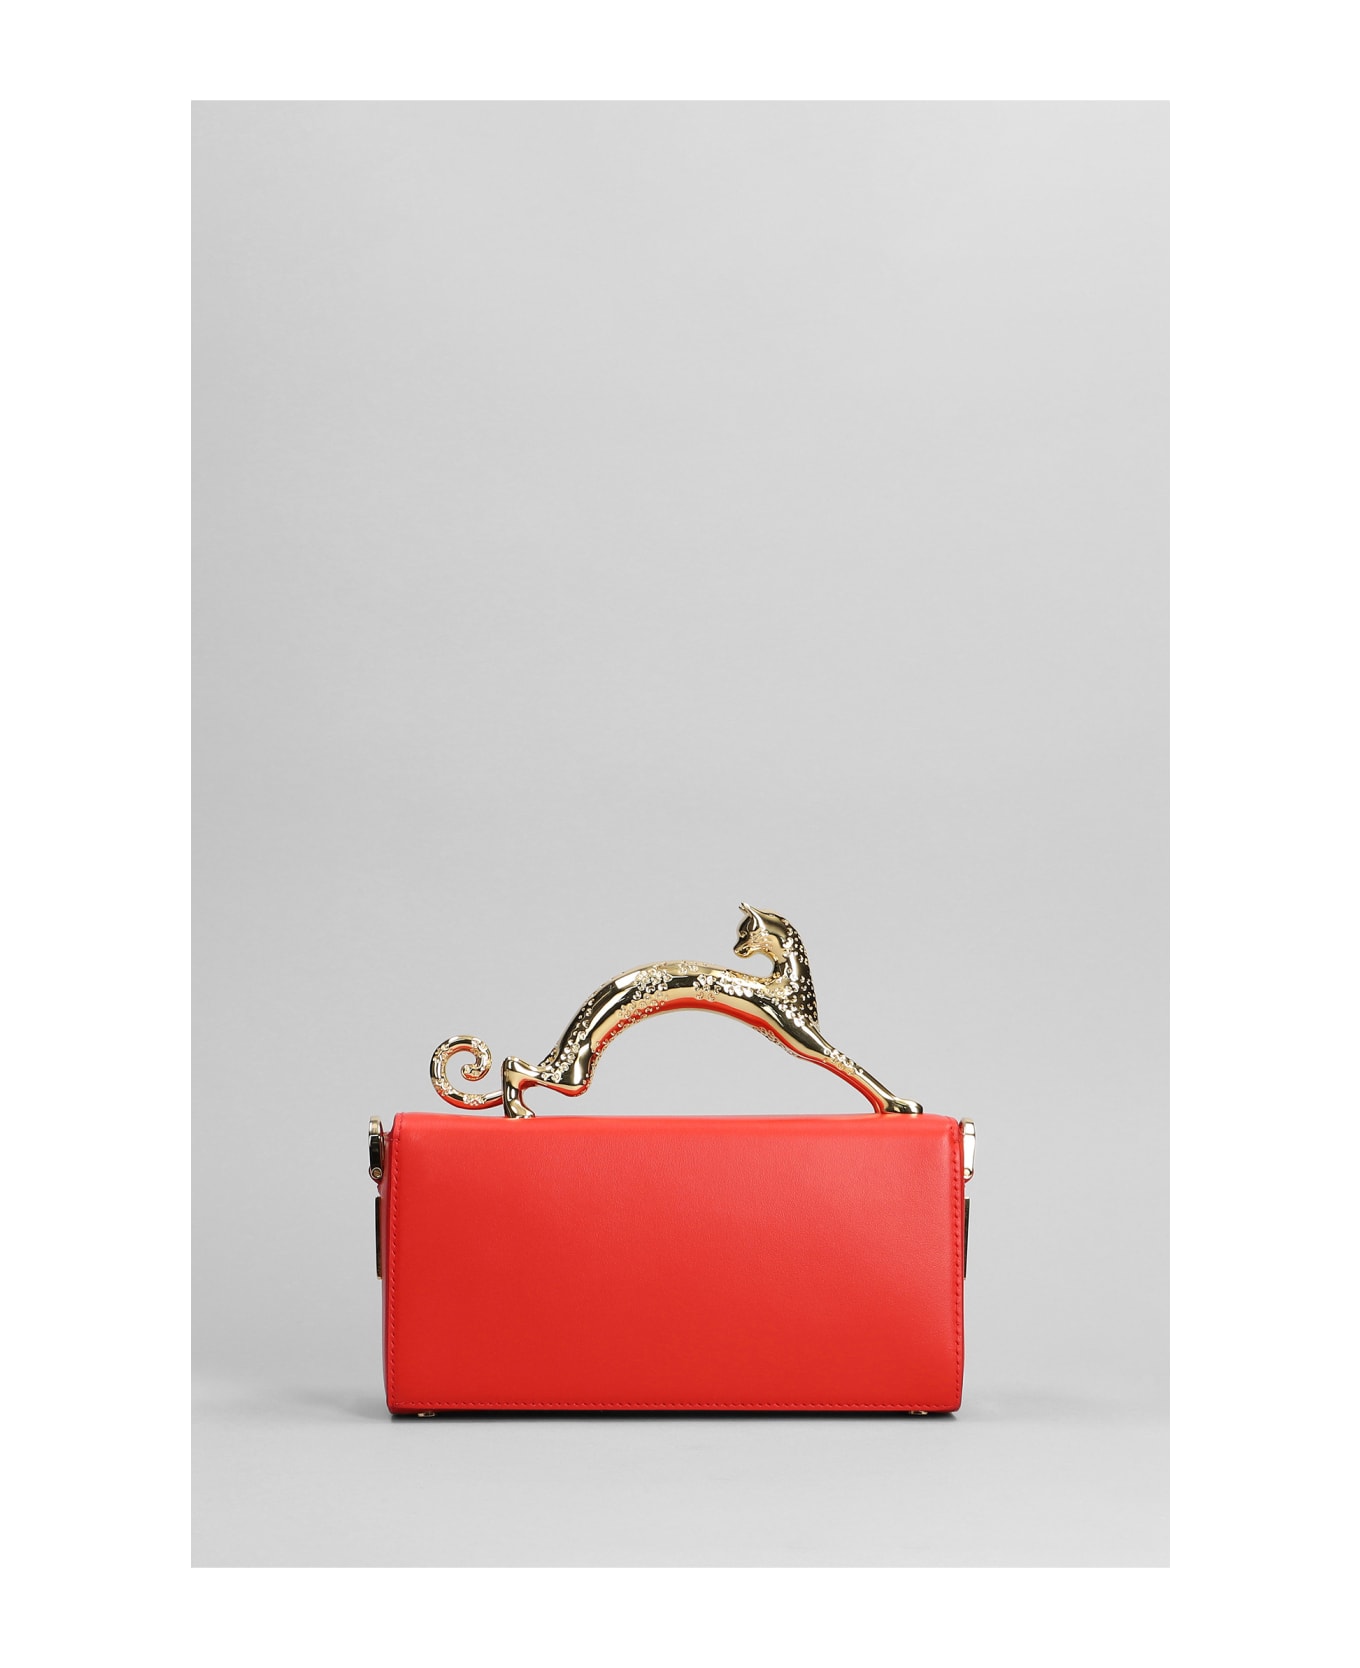 Lanvin Hand Bag In Red Leather - red トートバッグ